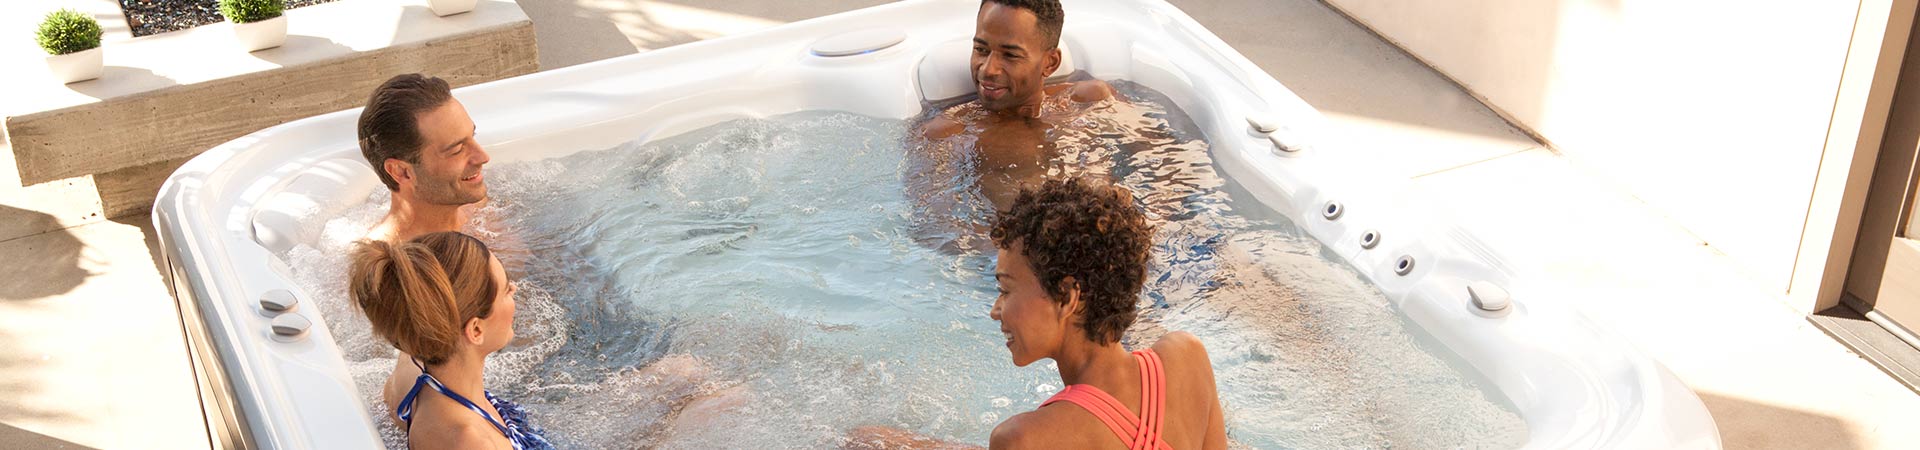 5 Accessories to Enhance Your Hot Tub Experience